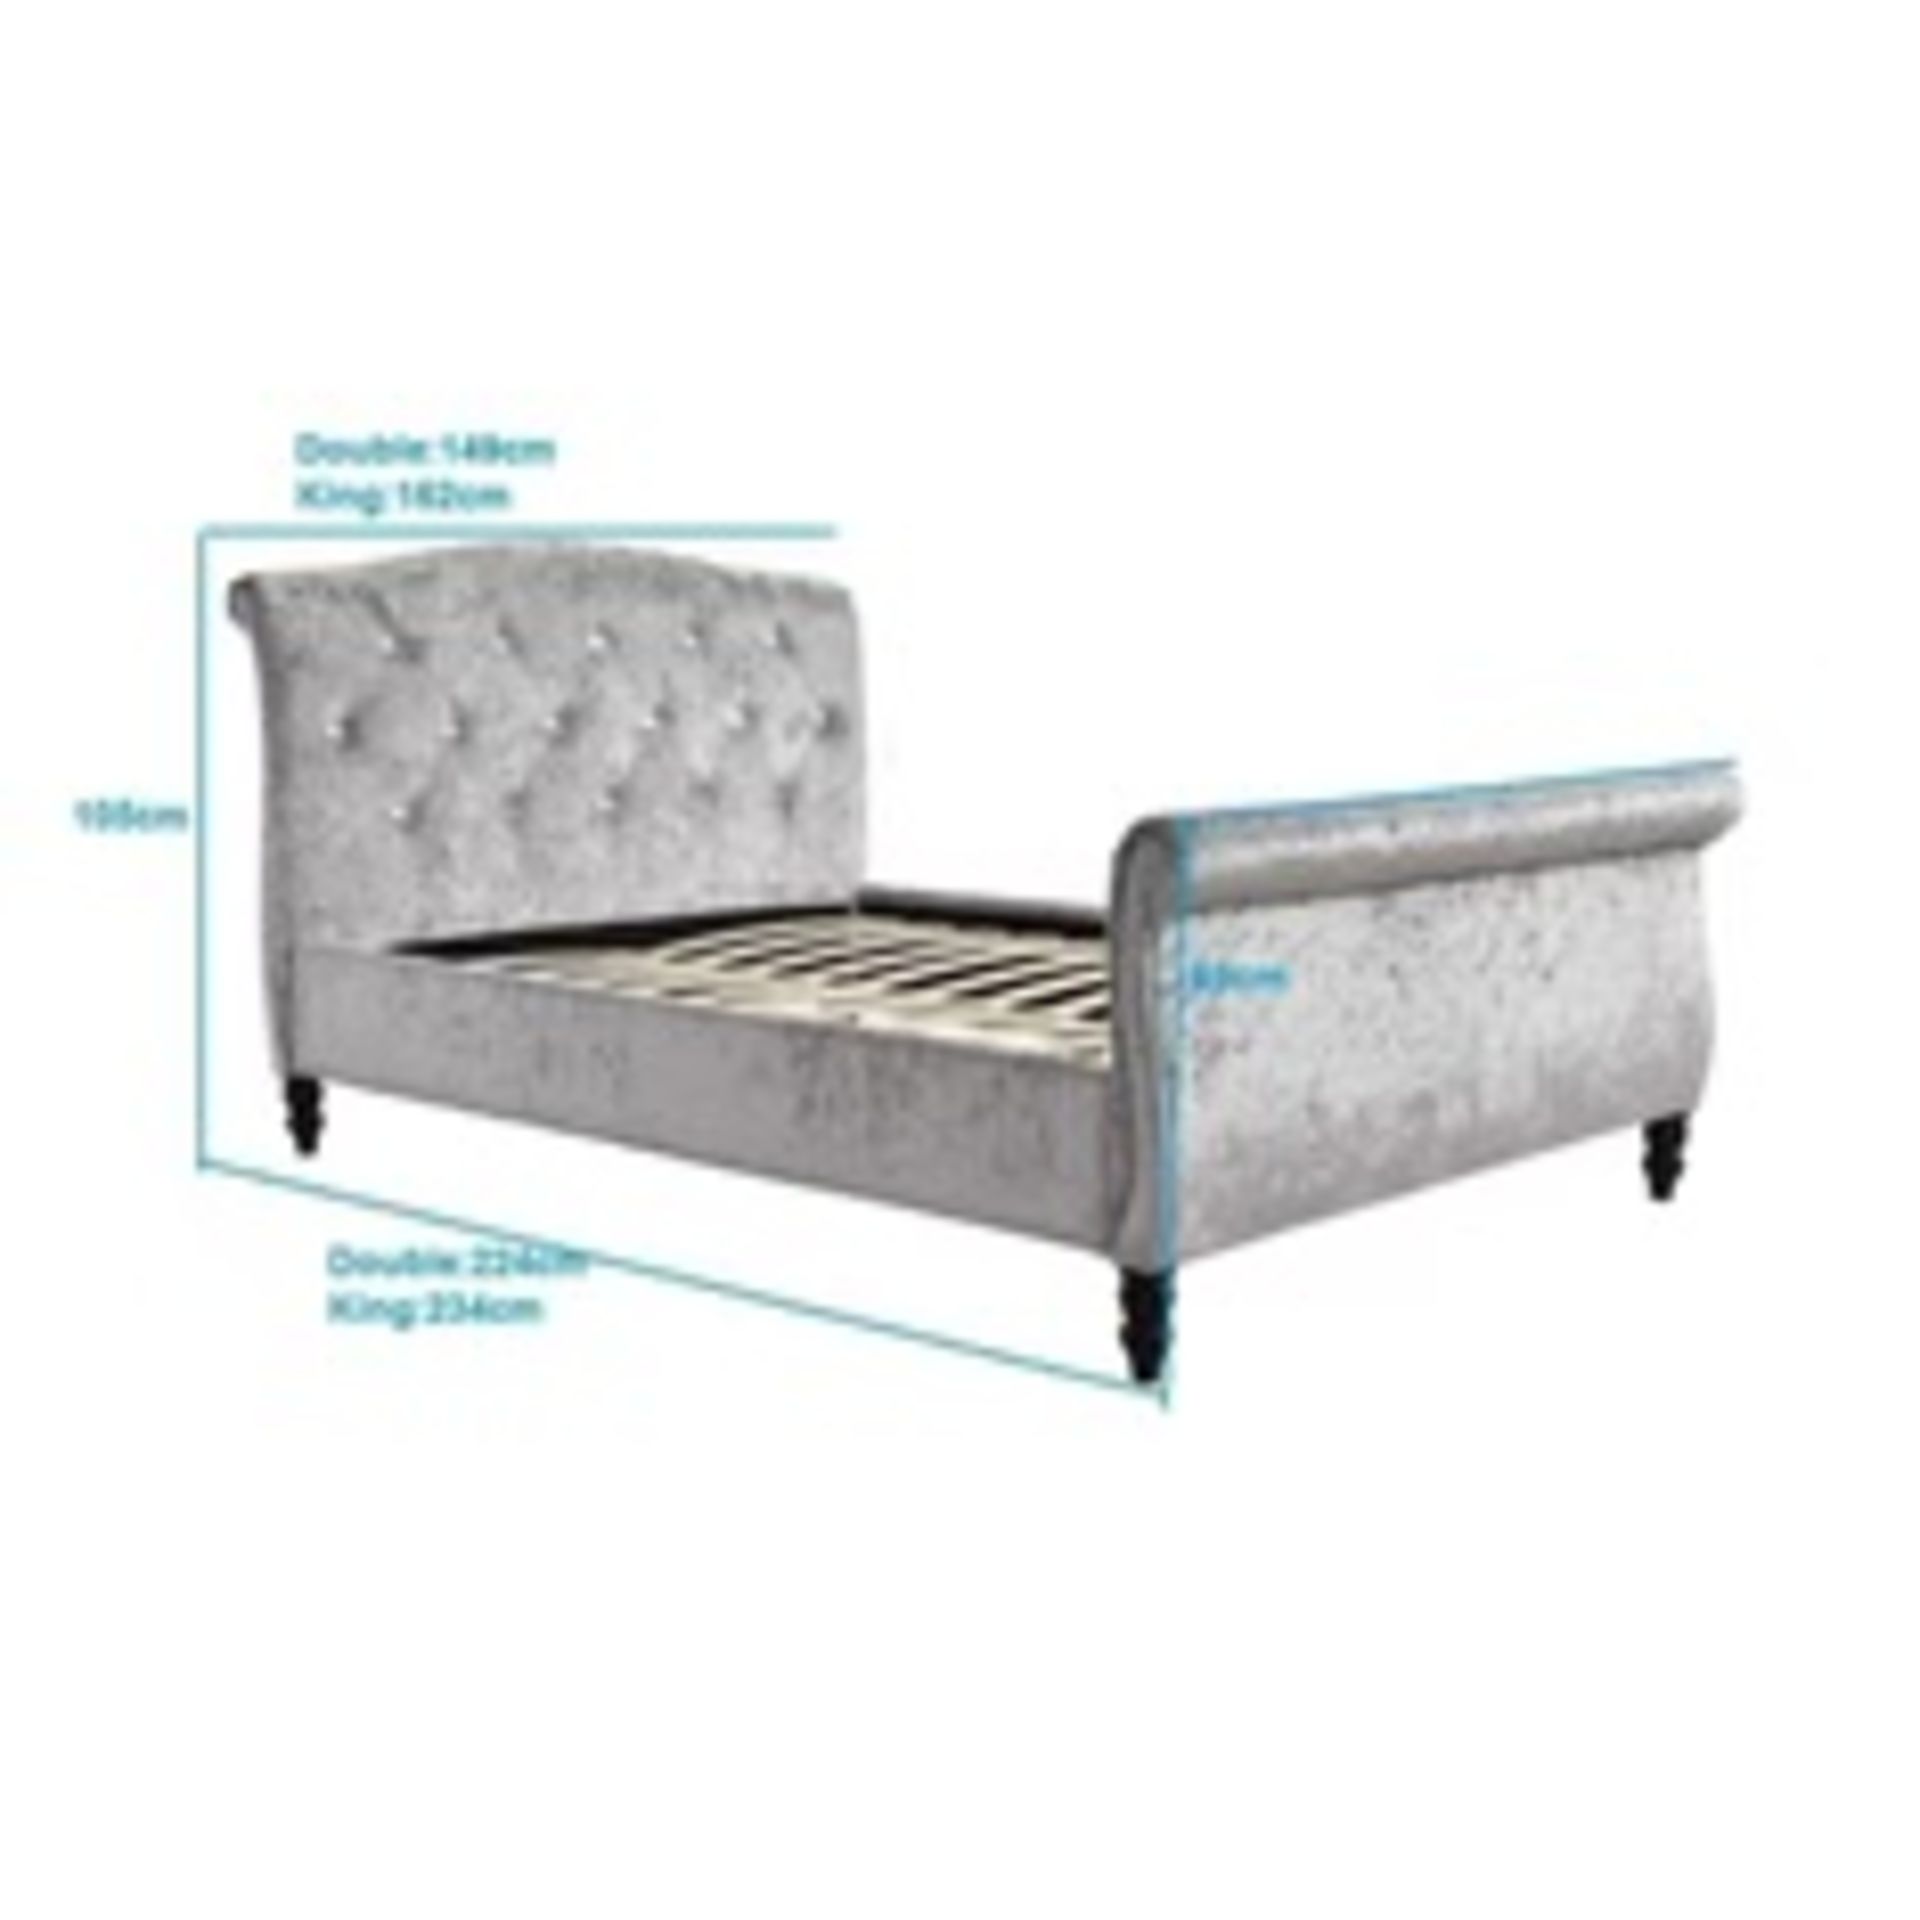 LOT CONTAINING 10 X MEISSA CRUSHED VELVET UPHOLSTERED SLEIGH BED WITH DIAMANTE HEADBOARD, SILVER - Image 3 of 3